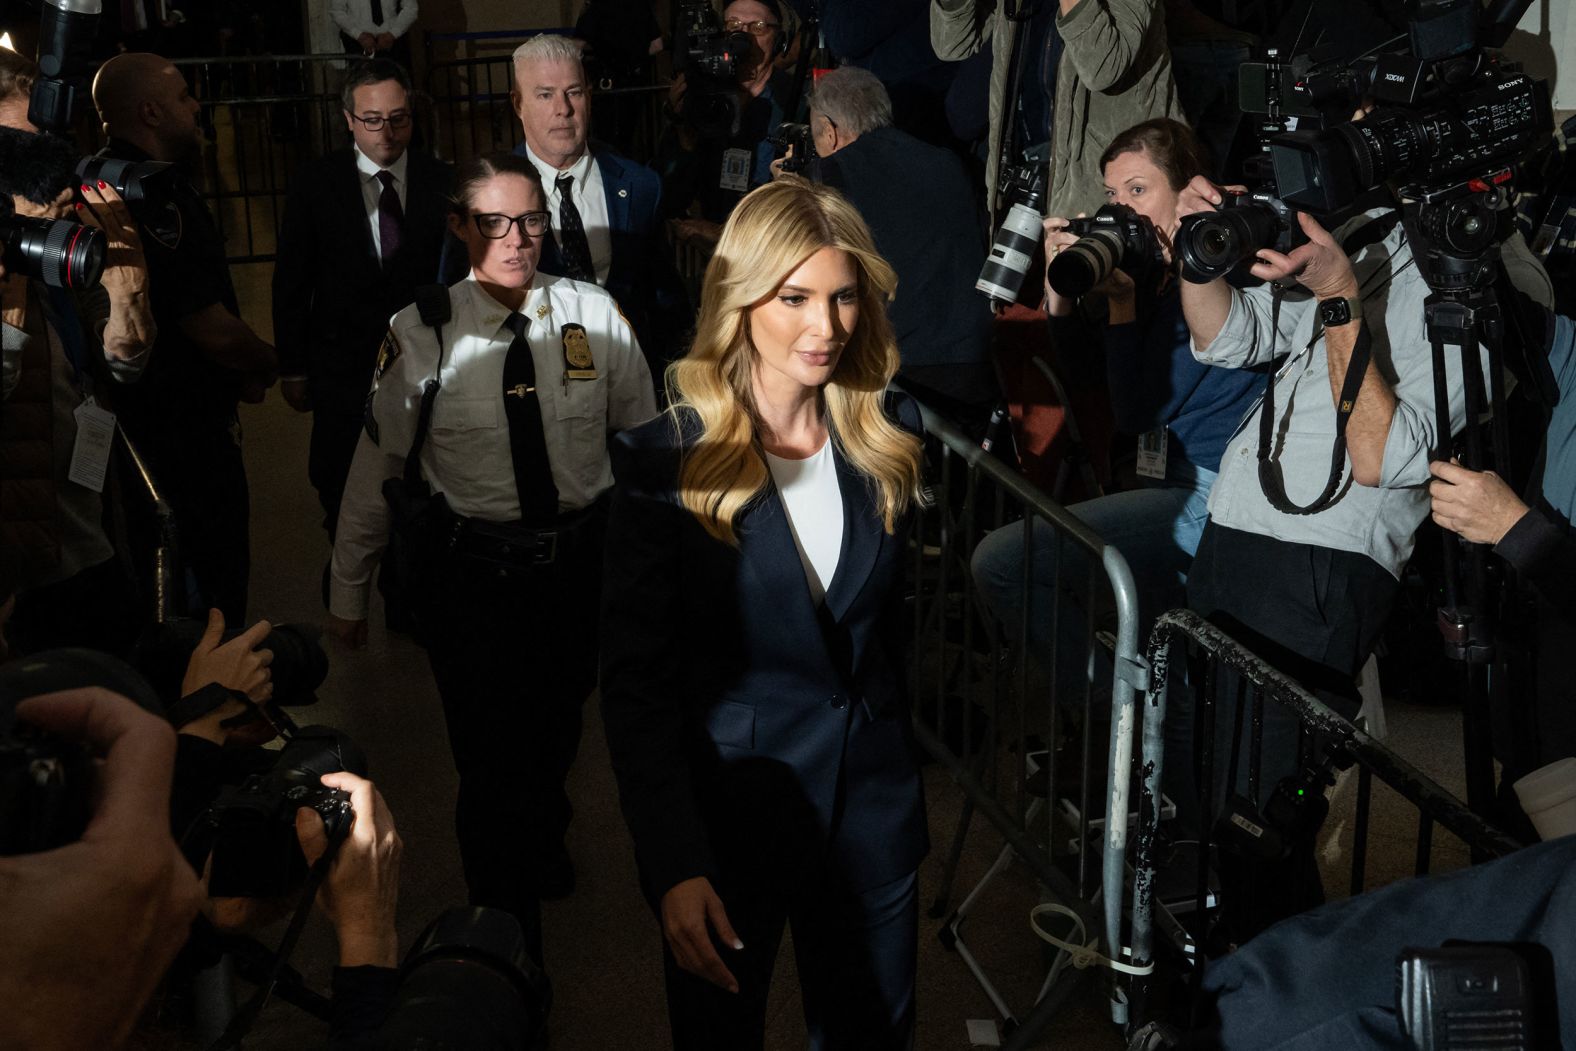 Trump's daughter Ivanka leaves for a lunch break after testifying in the case on November 8. She discussed her role in negotiating loans for her father's purchases of the Doral golf resort in Florida and the Old Post Office in Washington, DC.